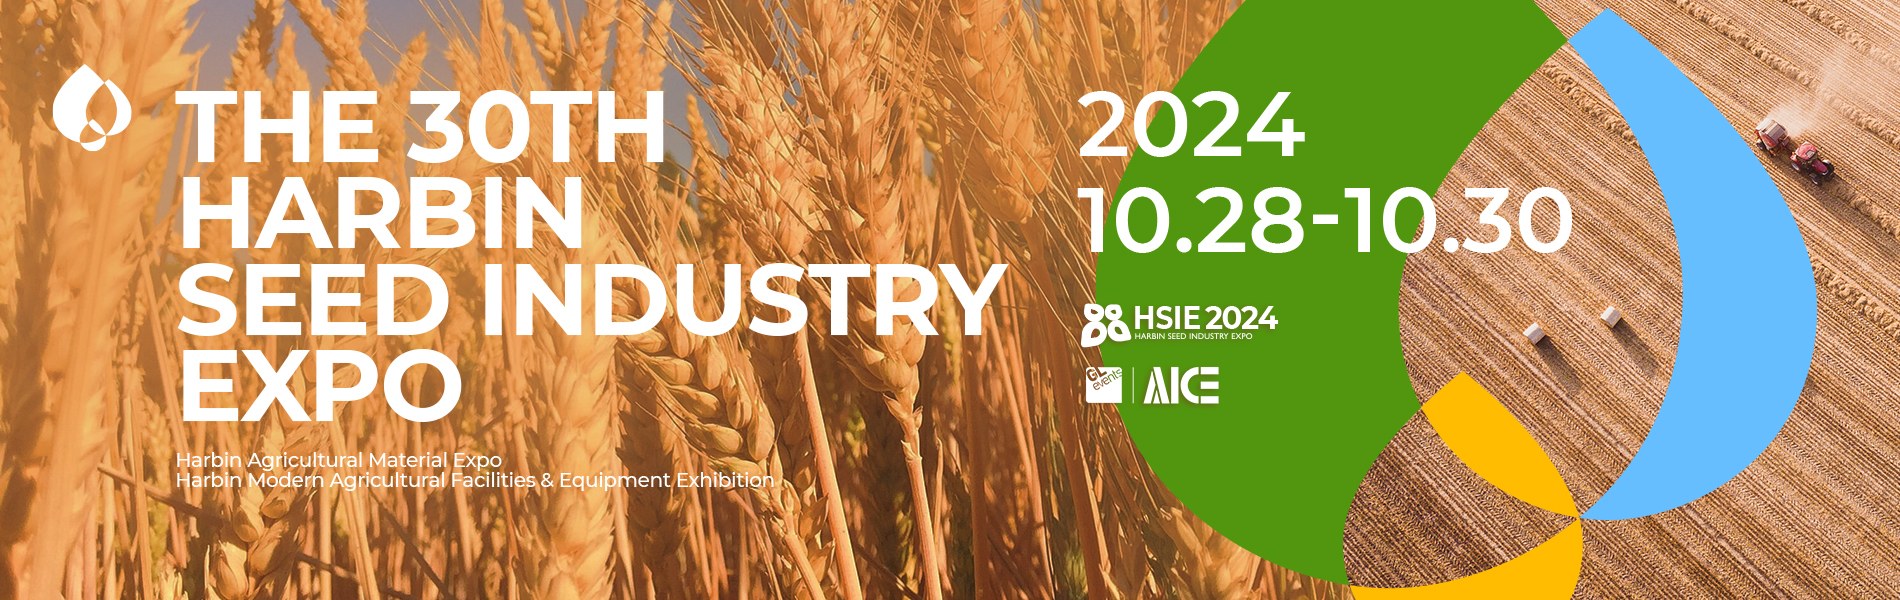 The 30th Harbin Seed Industry Expo